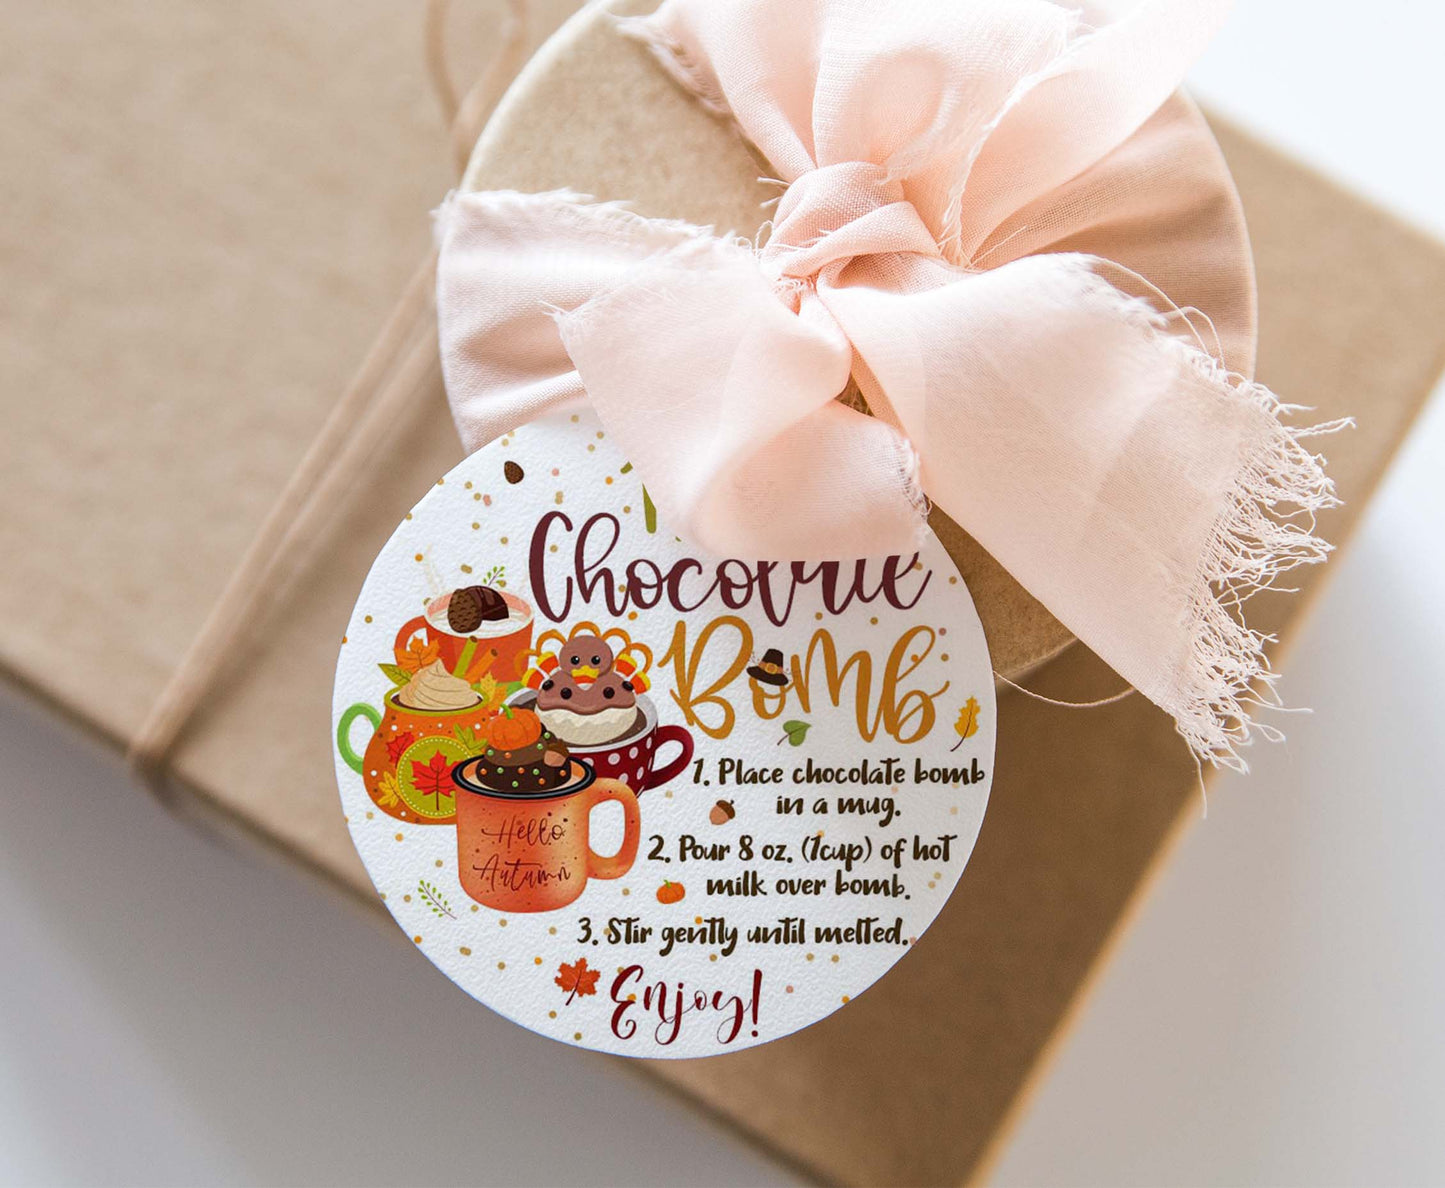 Turkey Hot Chocolate Bomb Instructions Tags 2"x2" | Fall Gift Tags- 118